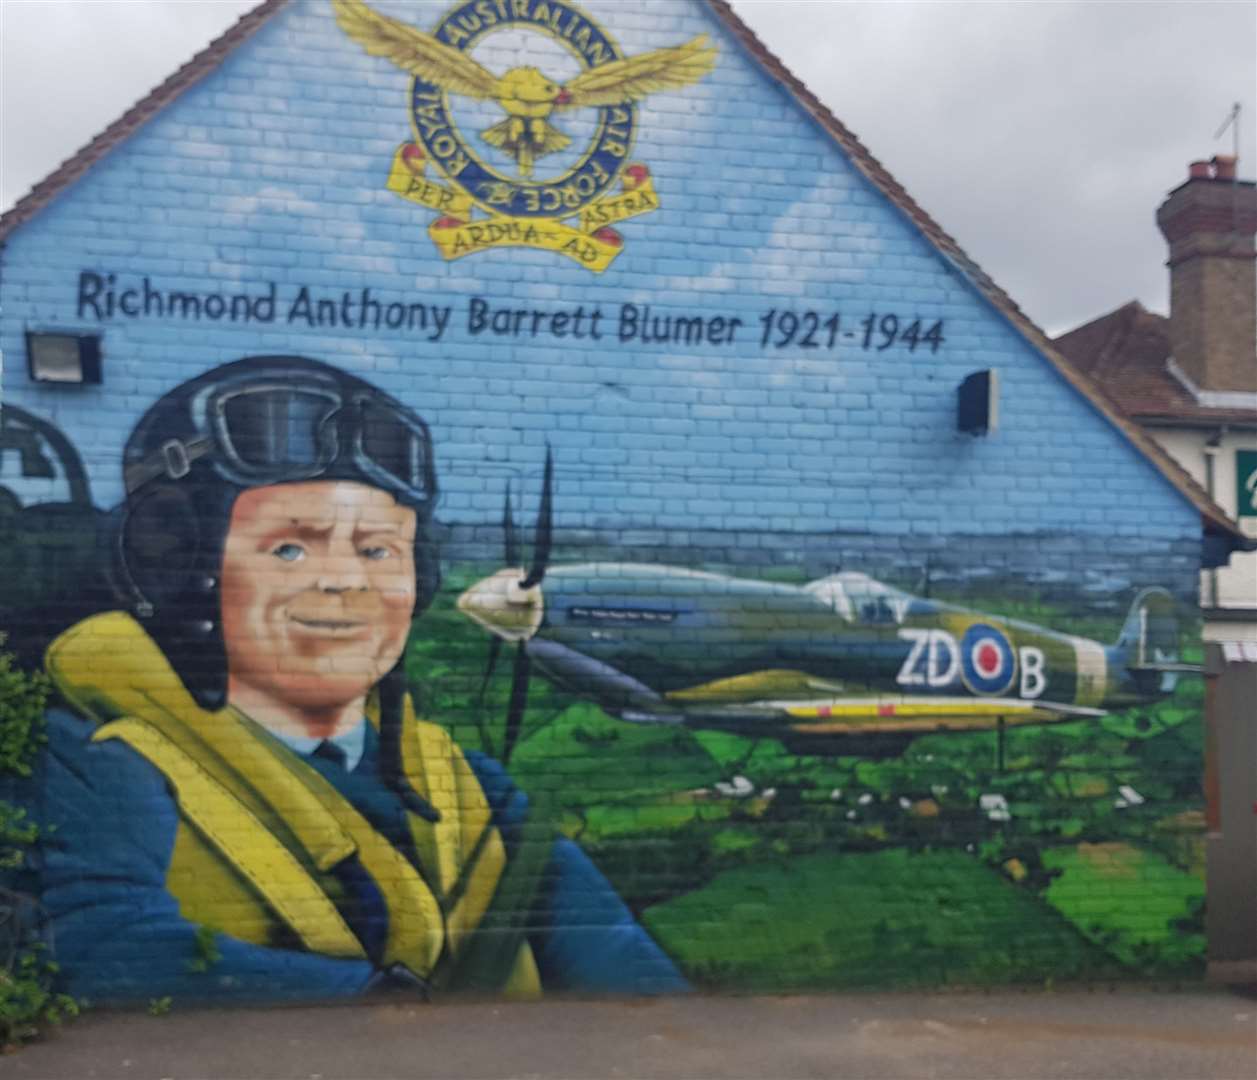 The mural of Mr Blumer which is on display at The Hop Pole Inn